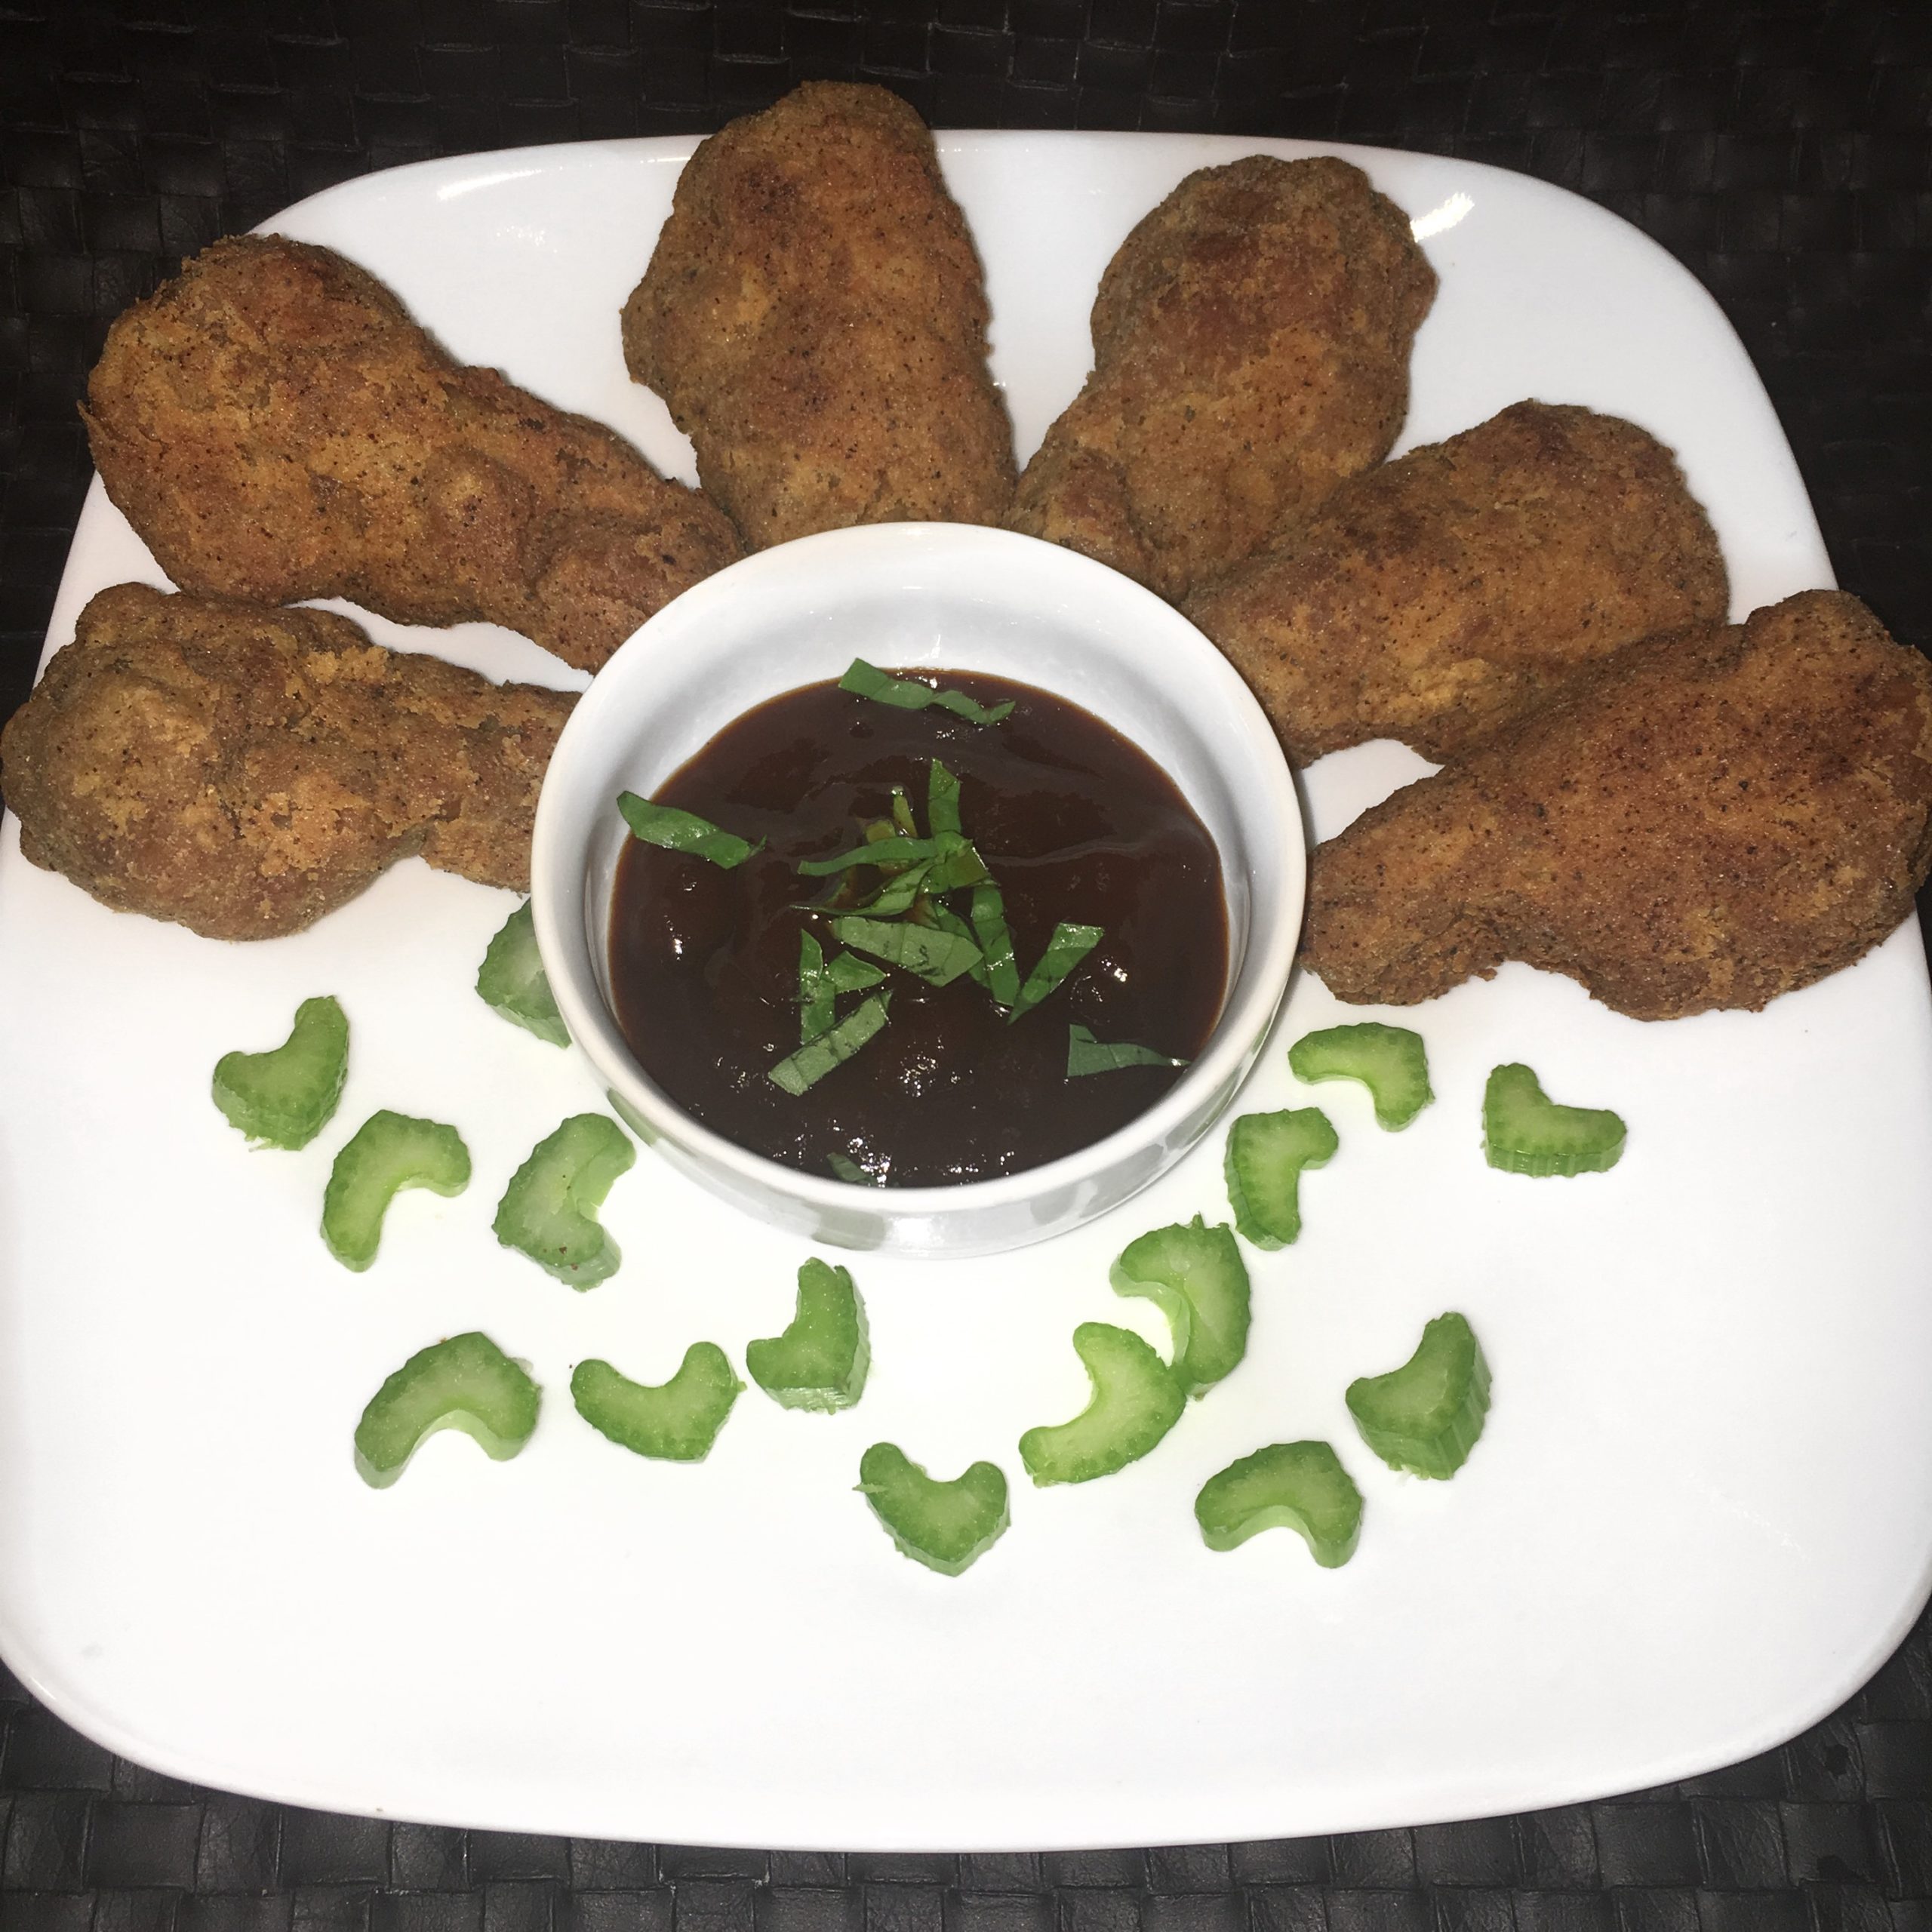 Download Mock Meat Vegan Fried Chicken made from scratch. Here's a great alternative!